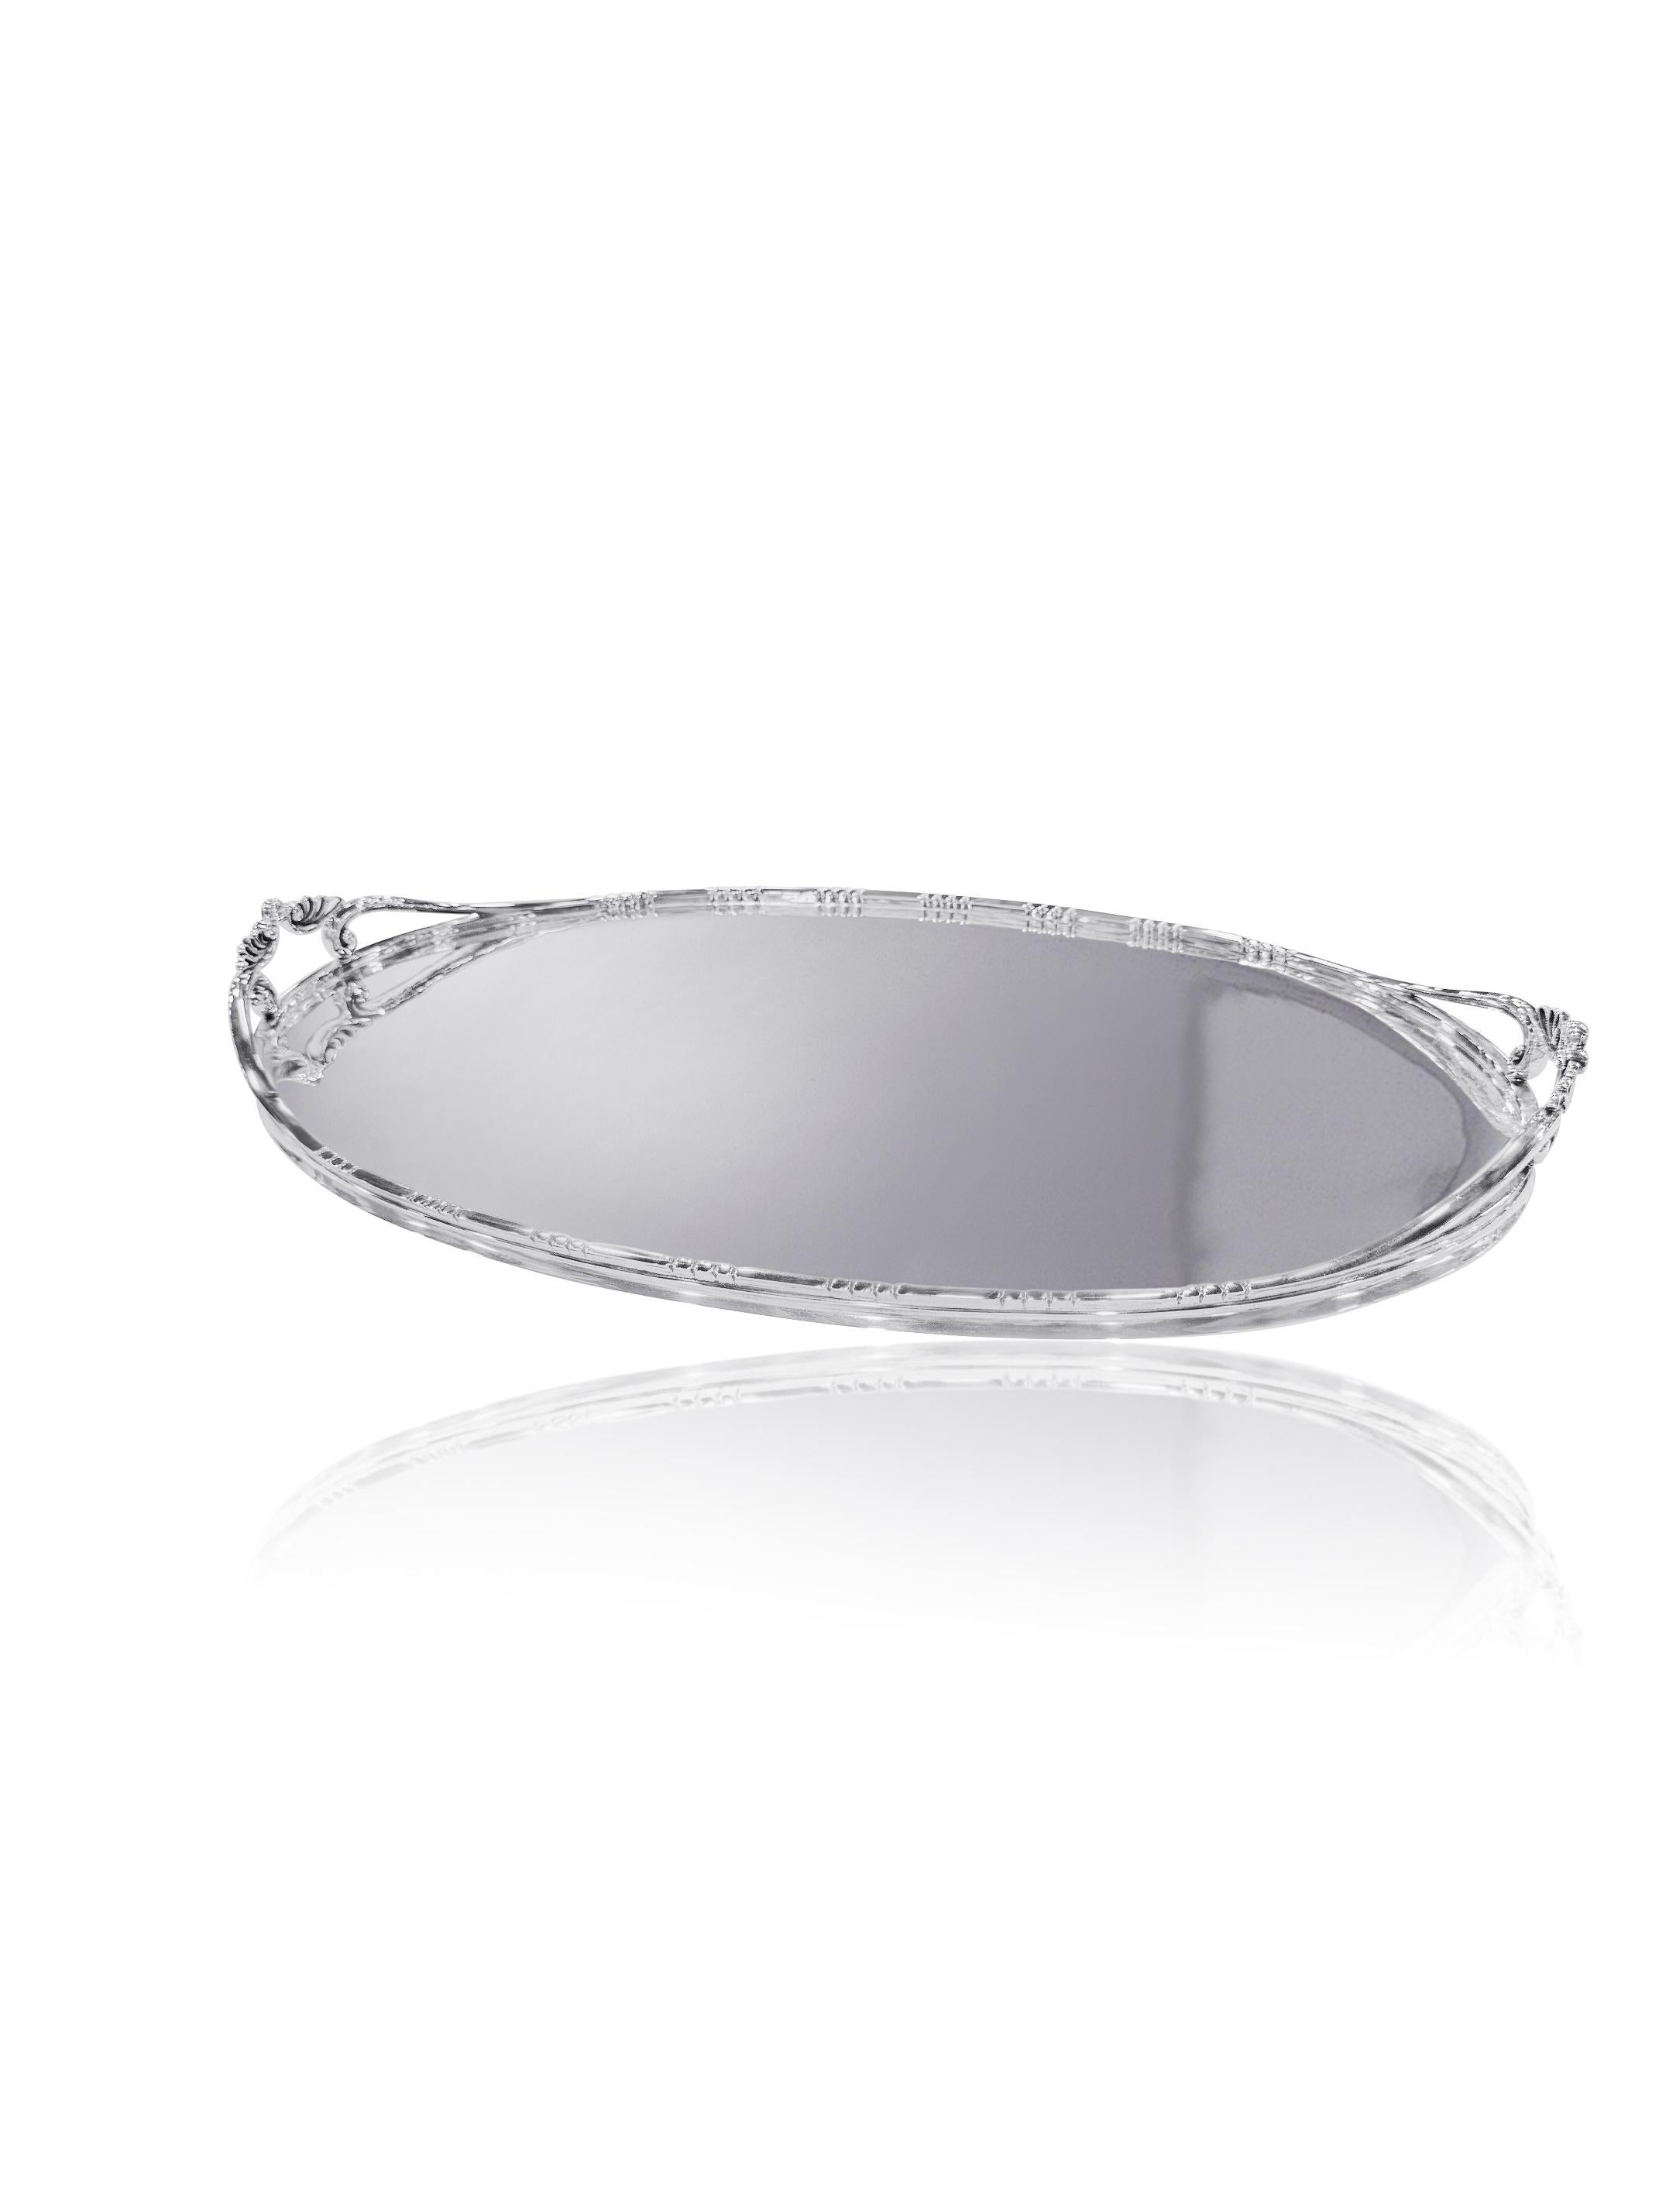 Georg Jensen Sterling Silver Tray 332C In Excellent Condition For Sale In Hellerup, DK